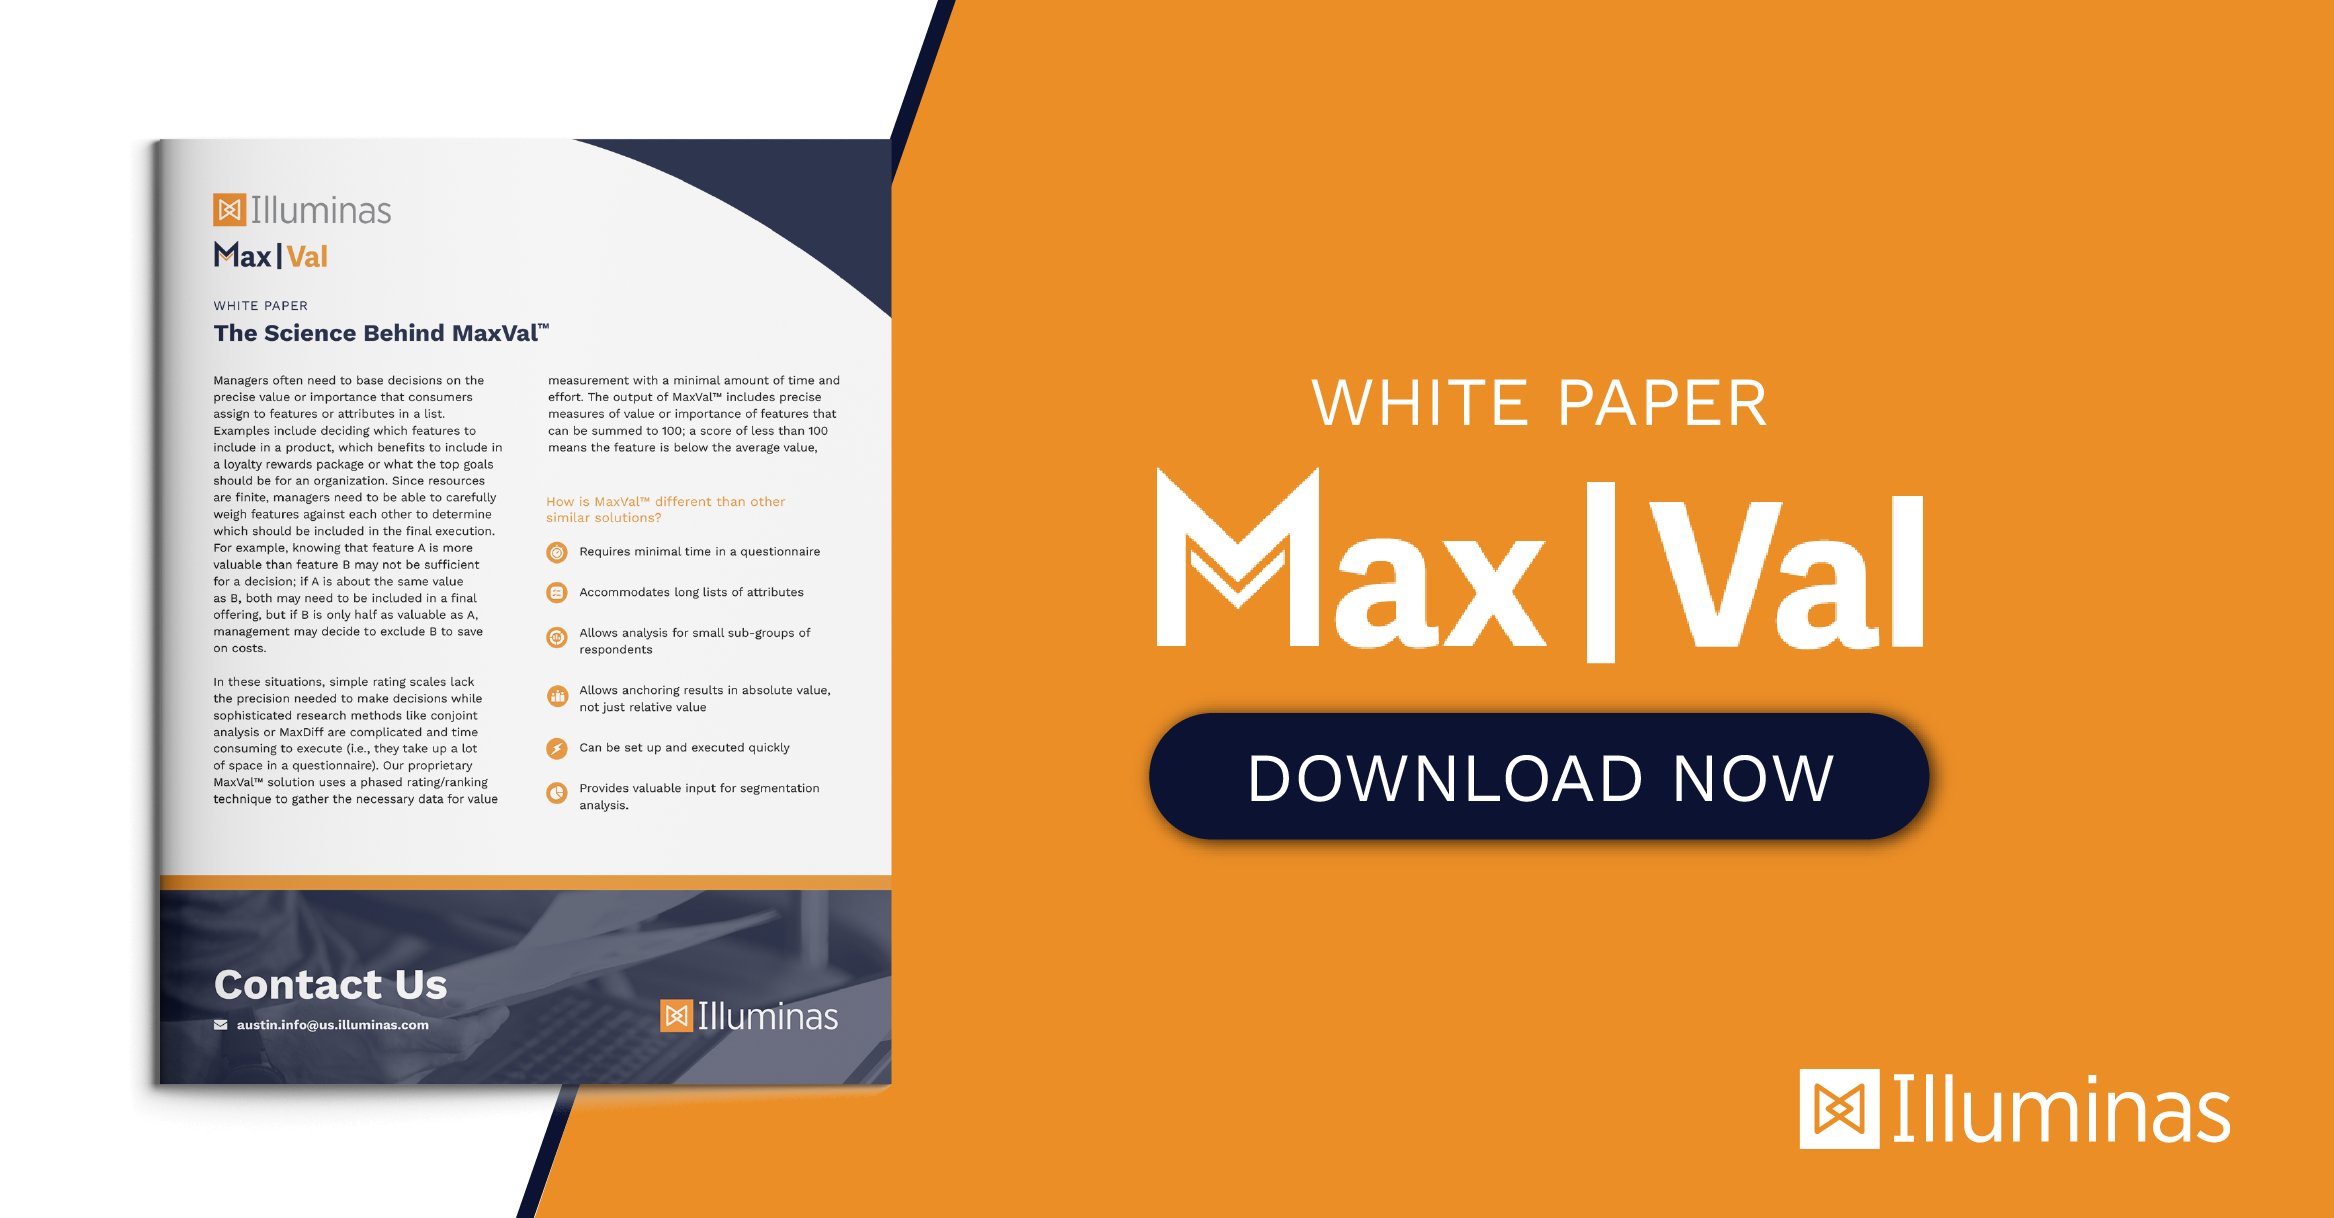 MaxVal white paper cover image